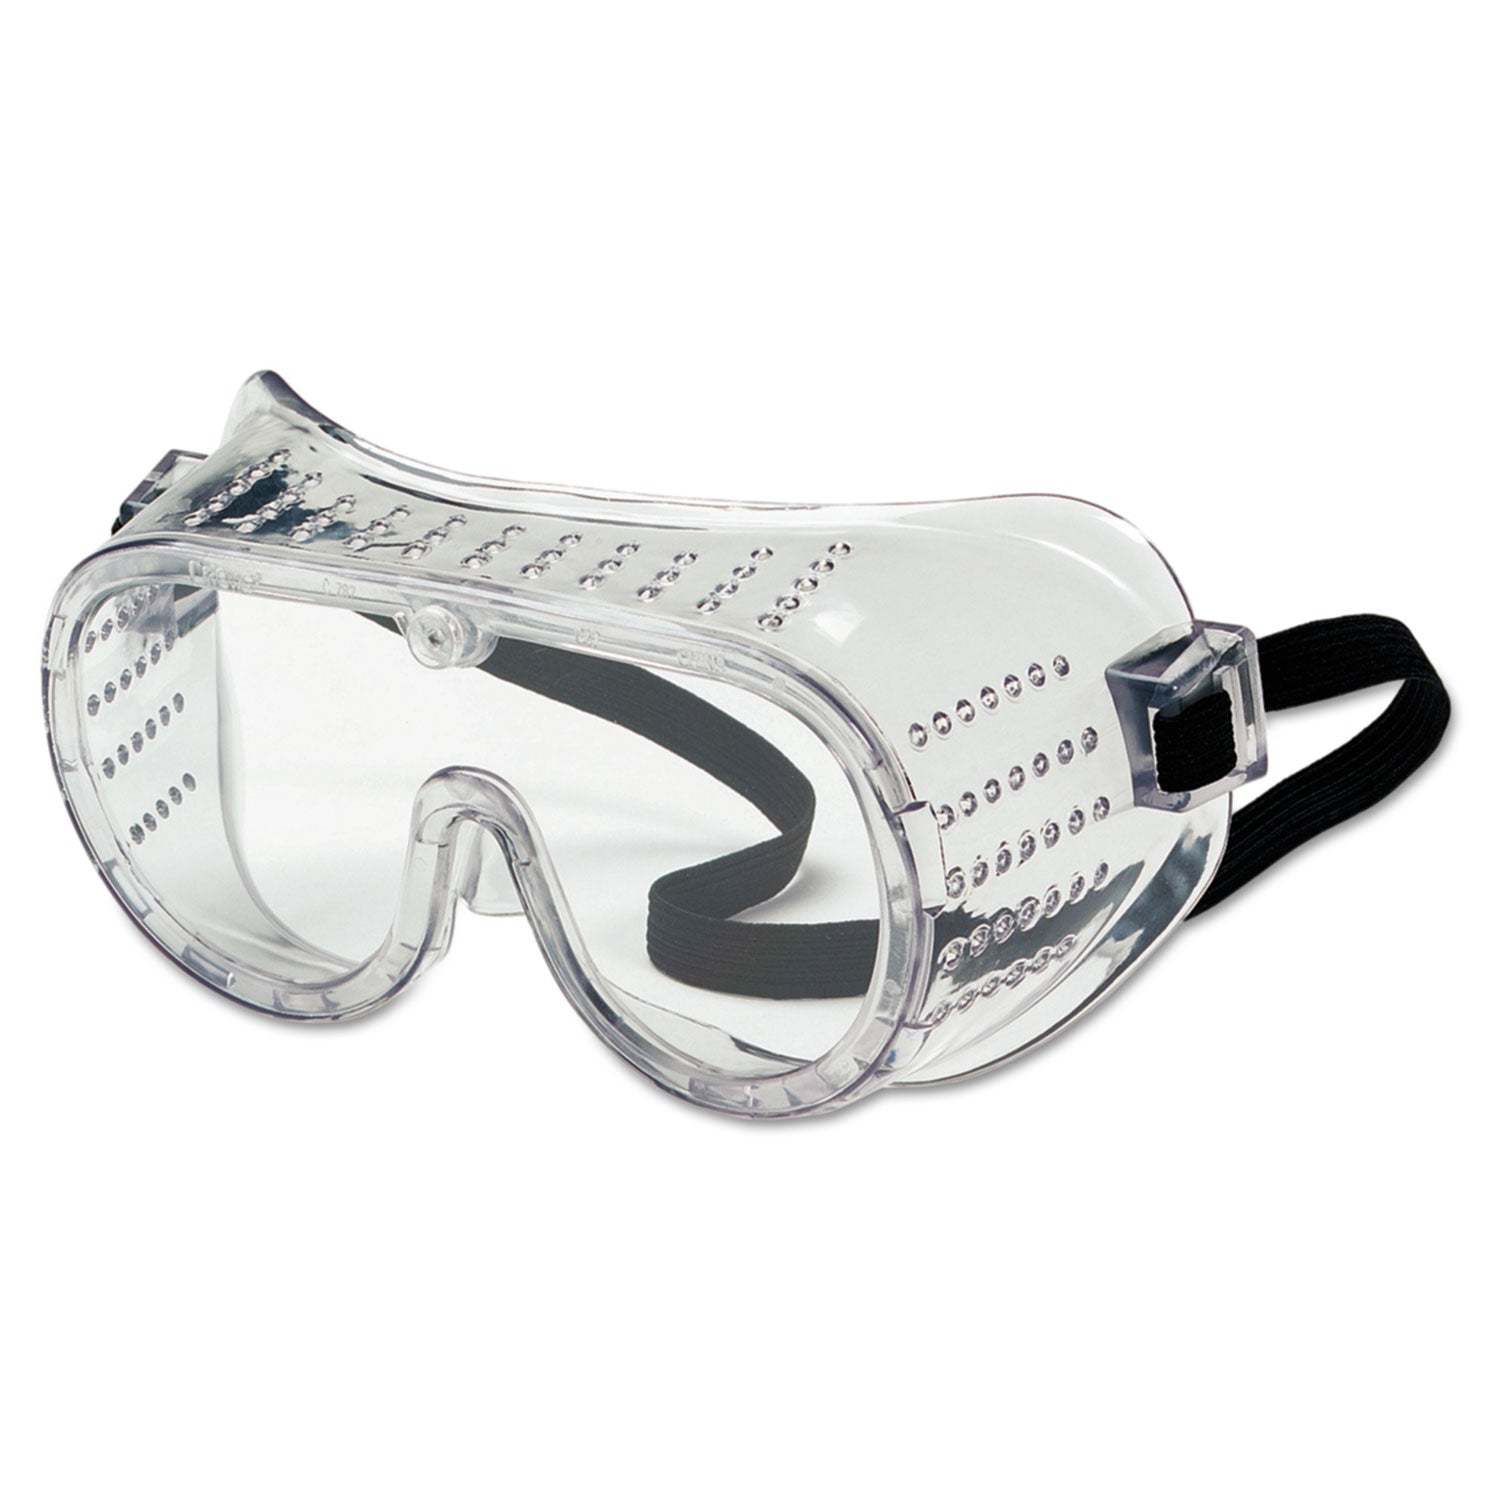 safety-goggles-over-glasses-clear-lens_crw2220bx - 1